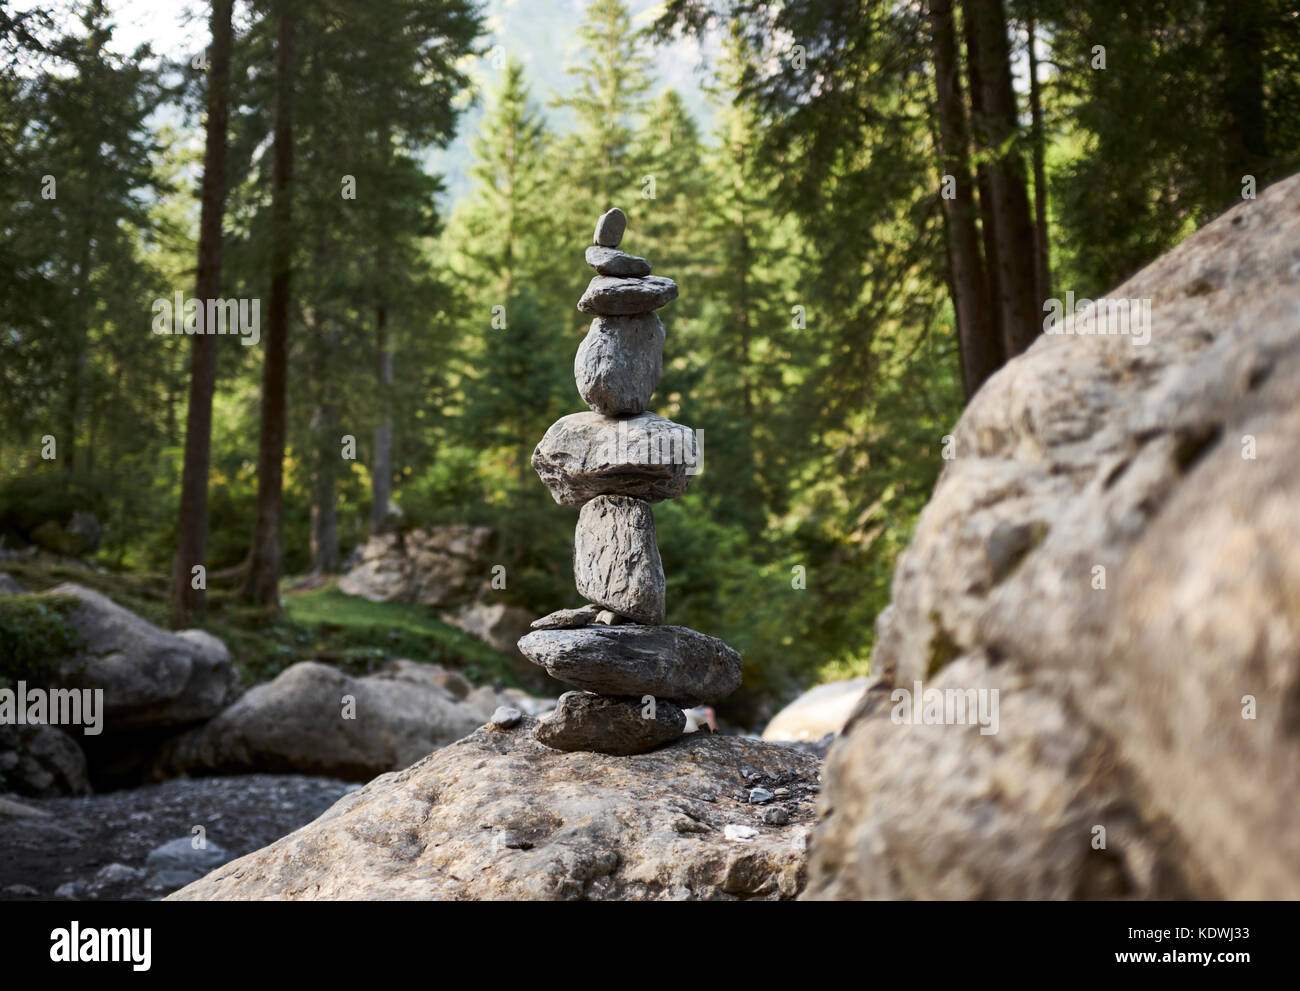 stacking stones in an alpine setting. Stock Photo